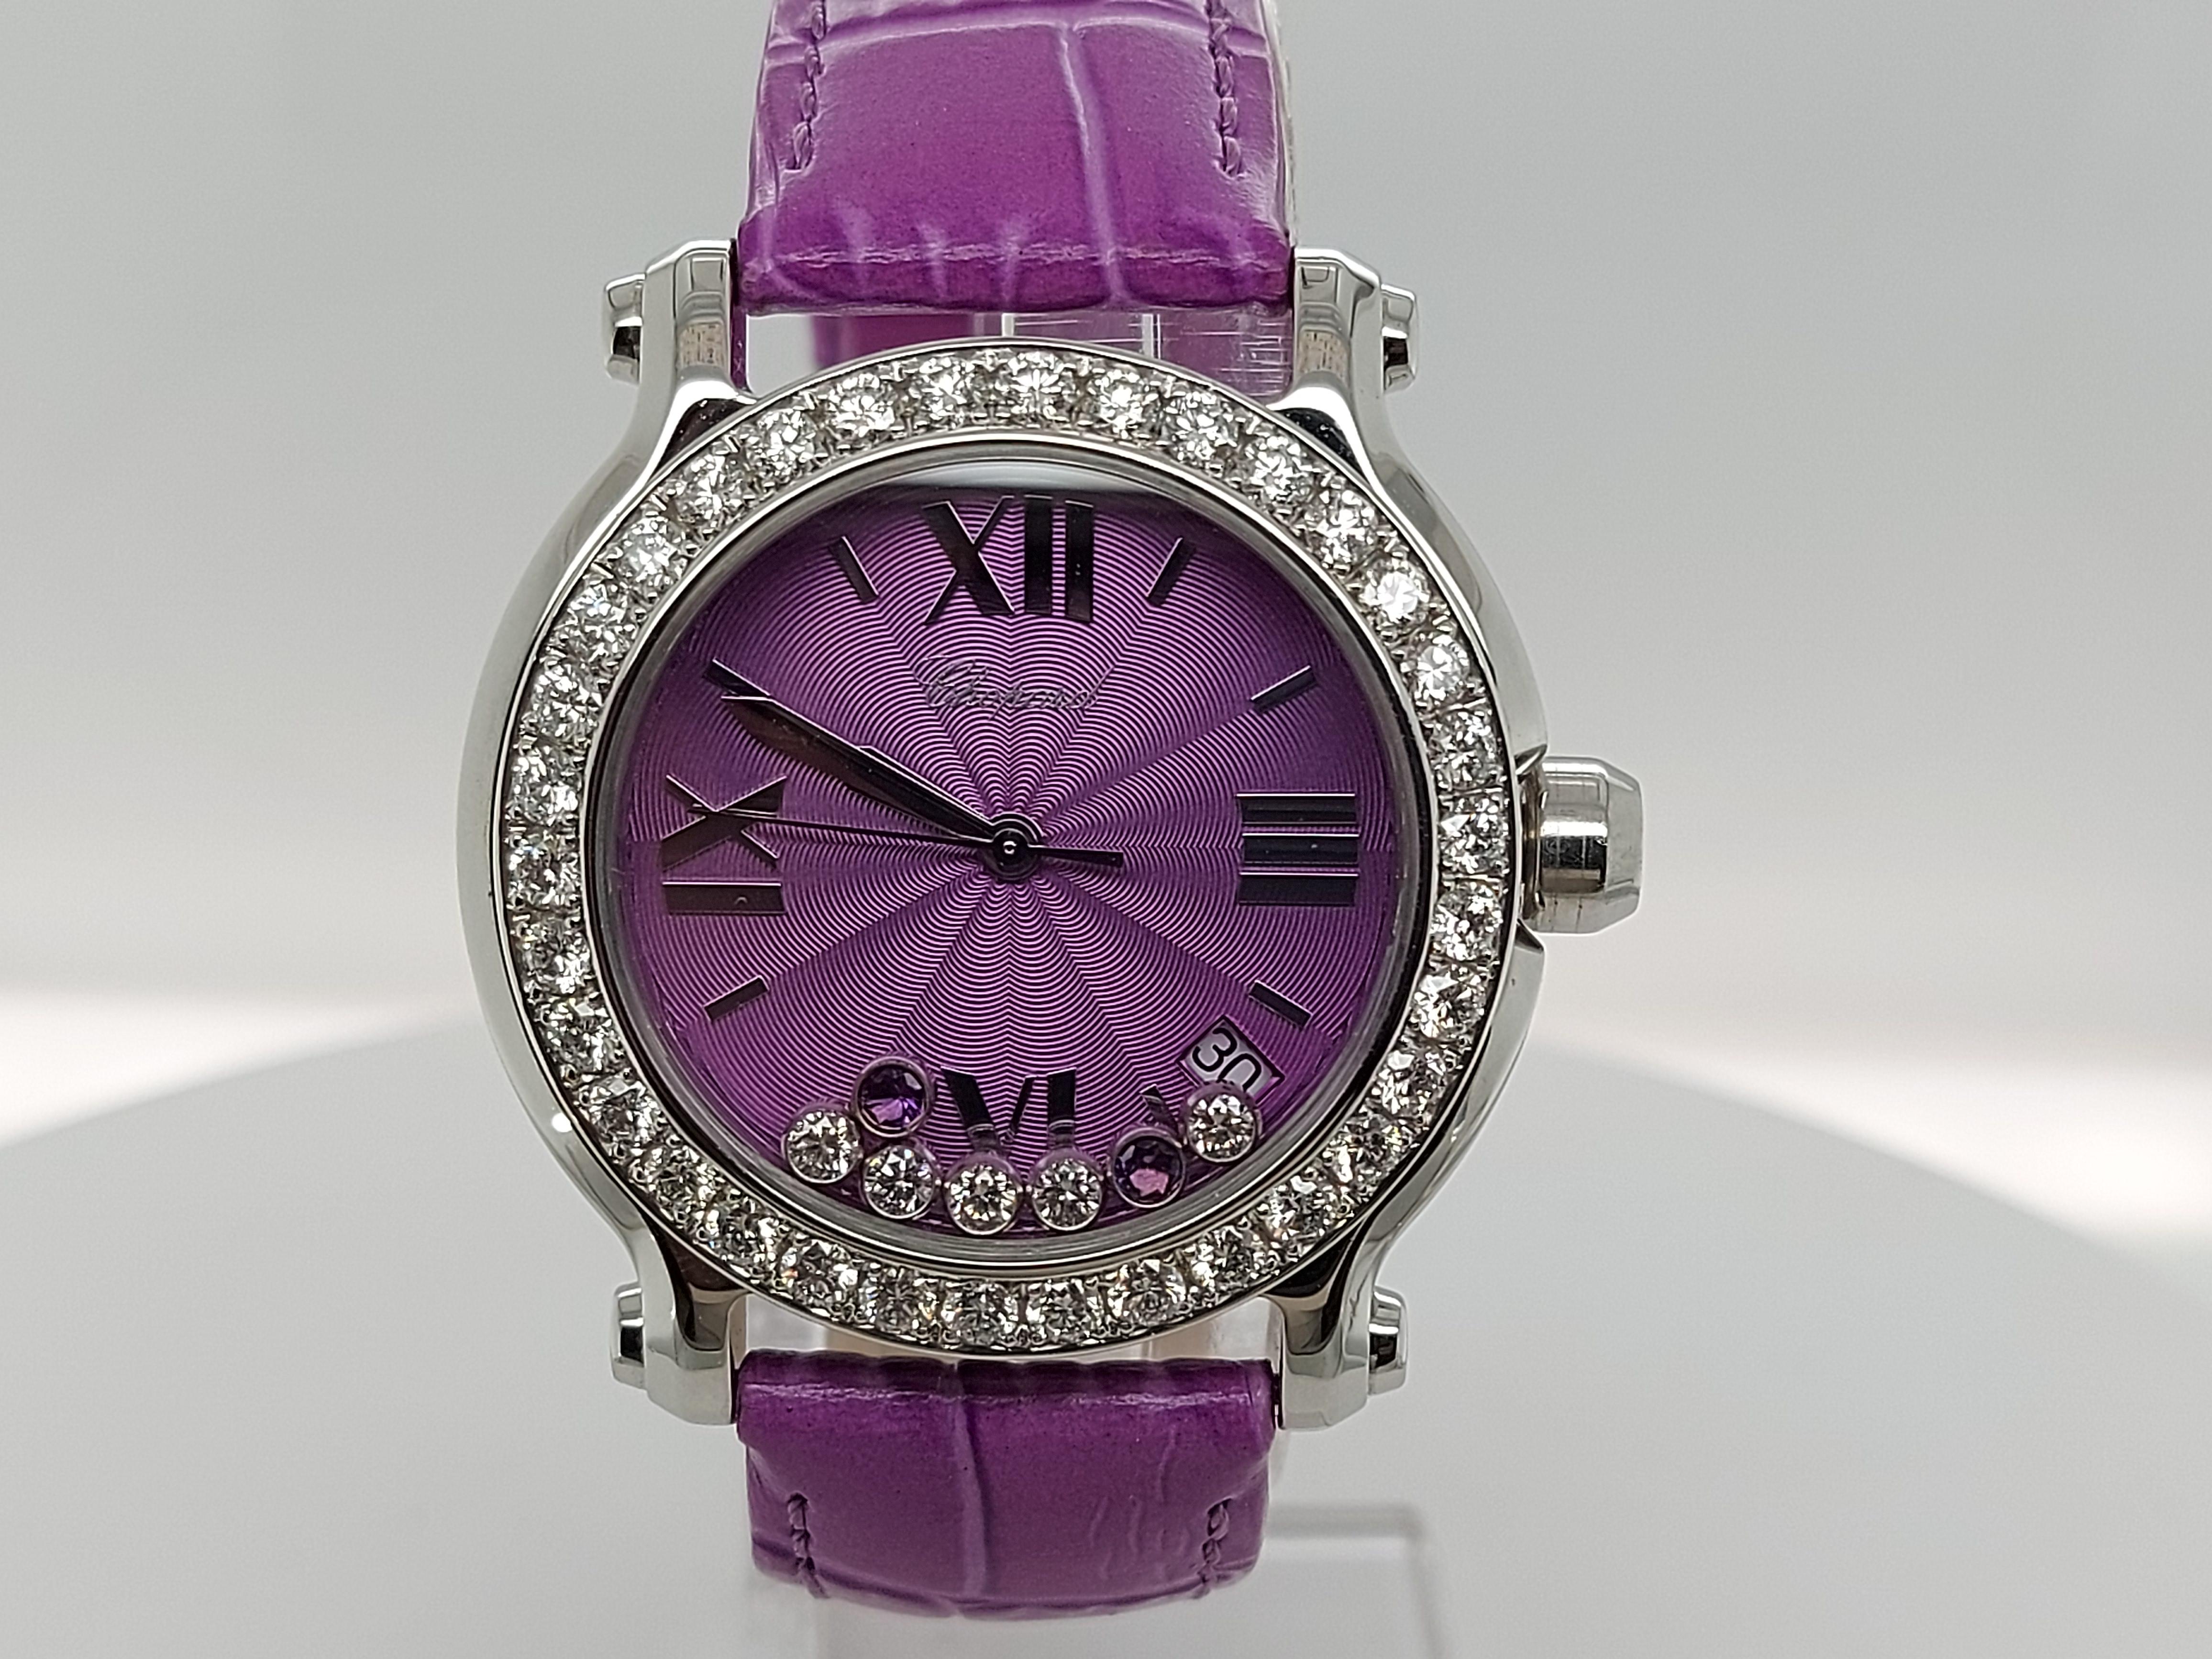 Beautiful and rare Chopard Happy Sport with floating diamonds and topazes .

Rare and collectable Chopard with Violet dial which was a special edition and very difficult to find !

Movement: quartz

Functions: hours, minutes, seconds, date

Dial: